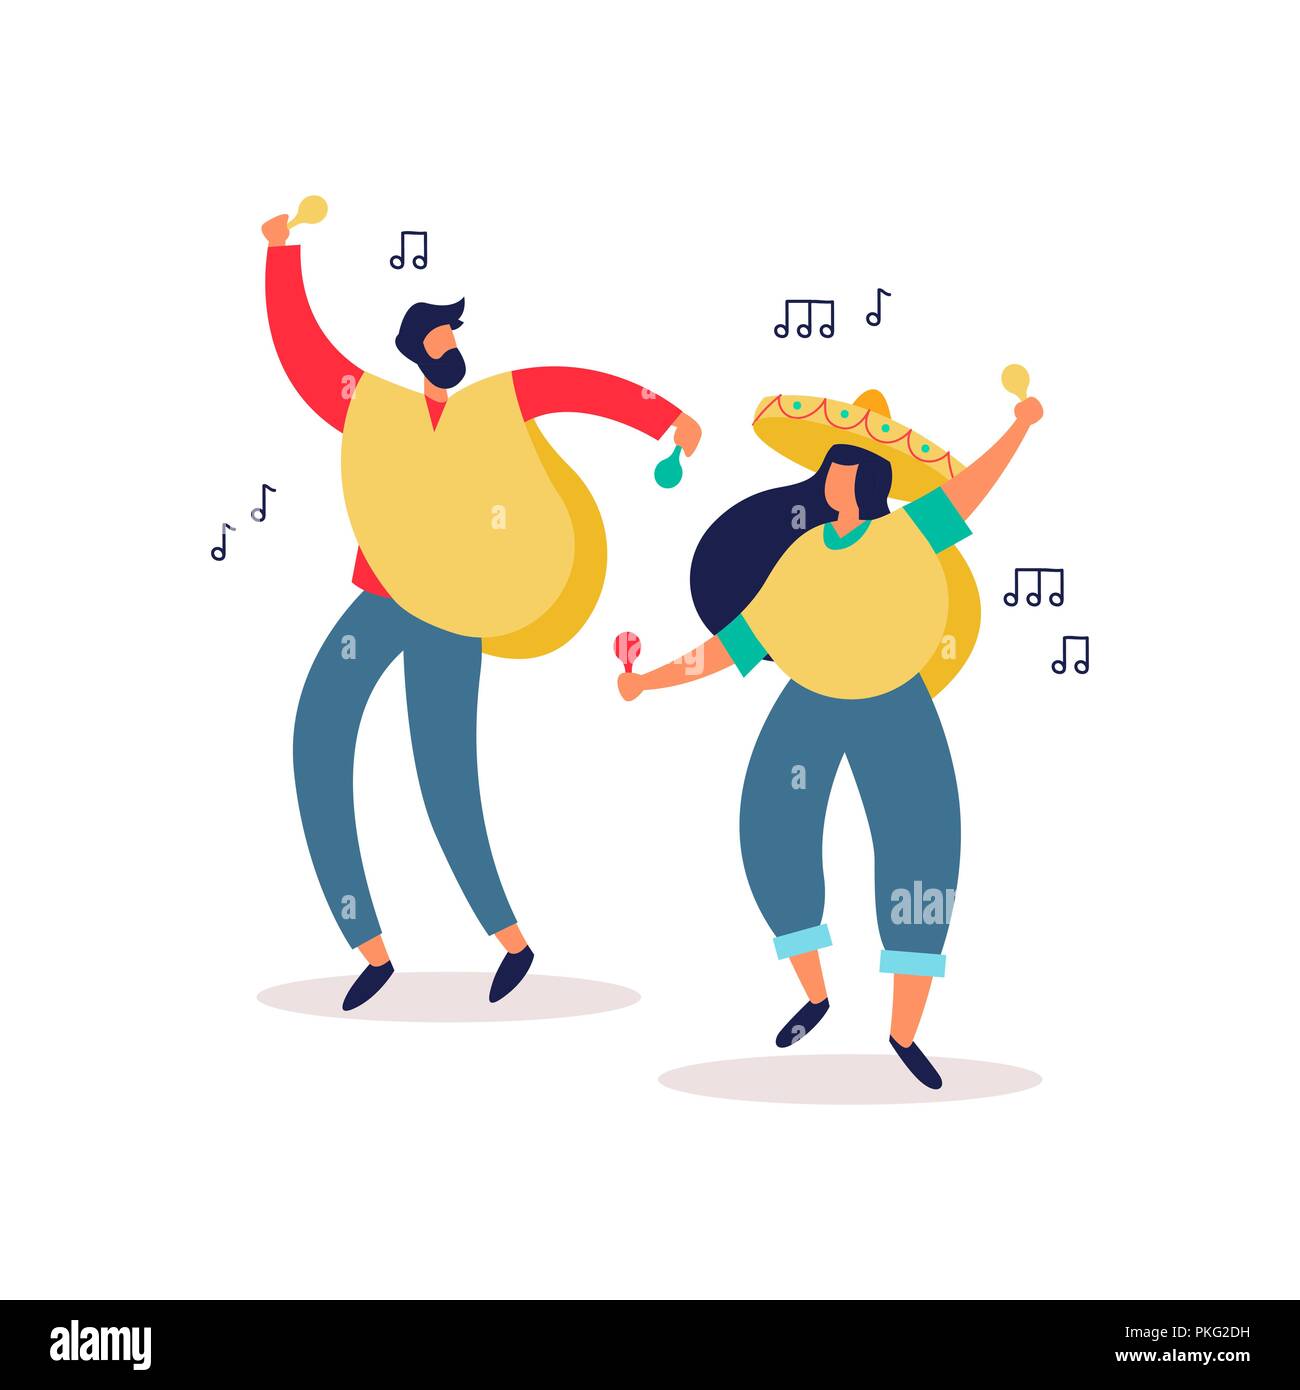 Mexican friends dancing together with traditional mexico culture clothes, maracas, mariachi hat and poncho. Isolated illustration for holiday or natio Stock Vector